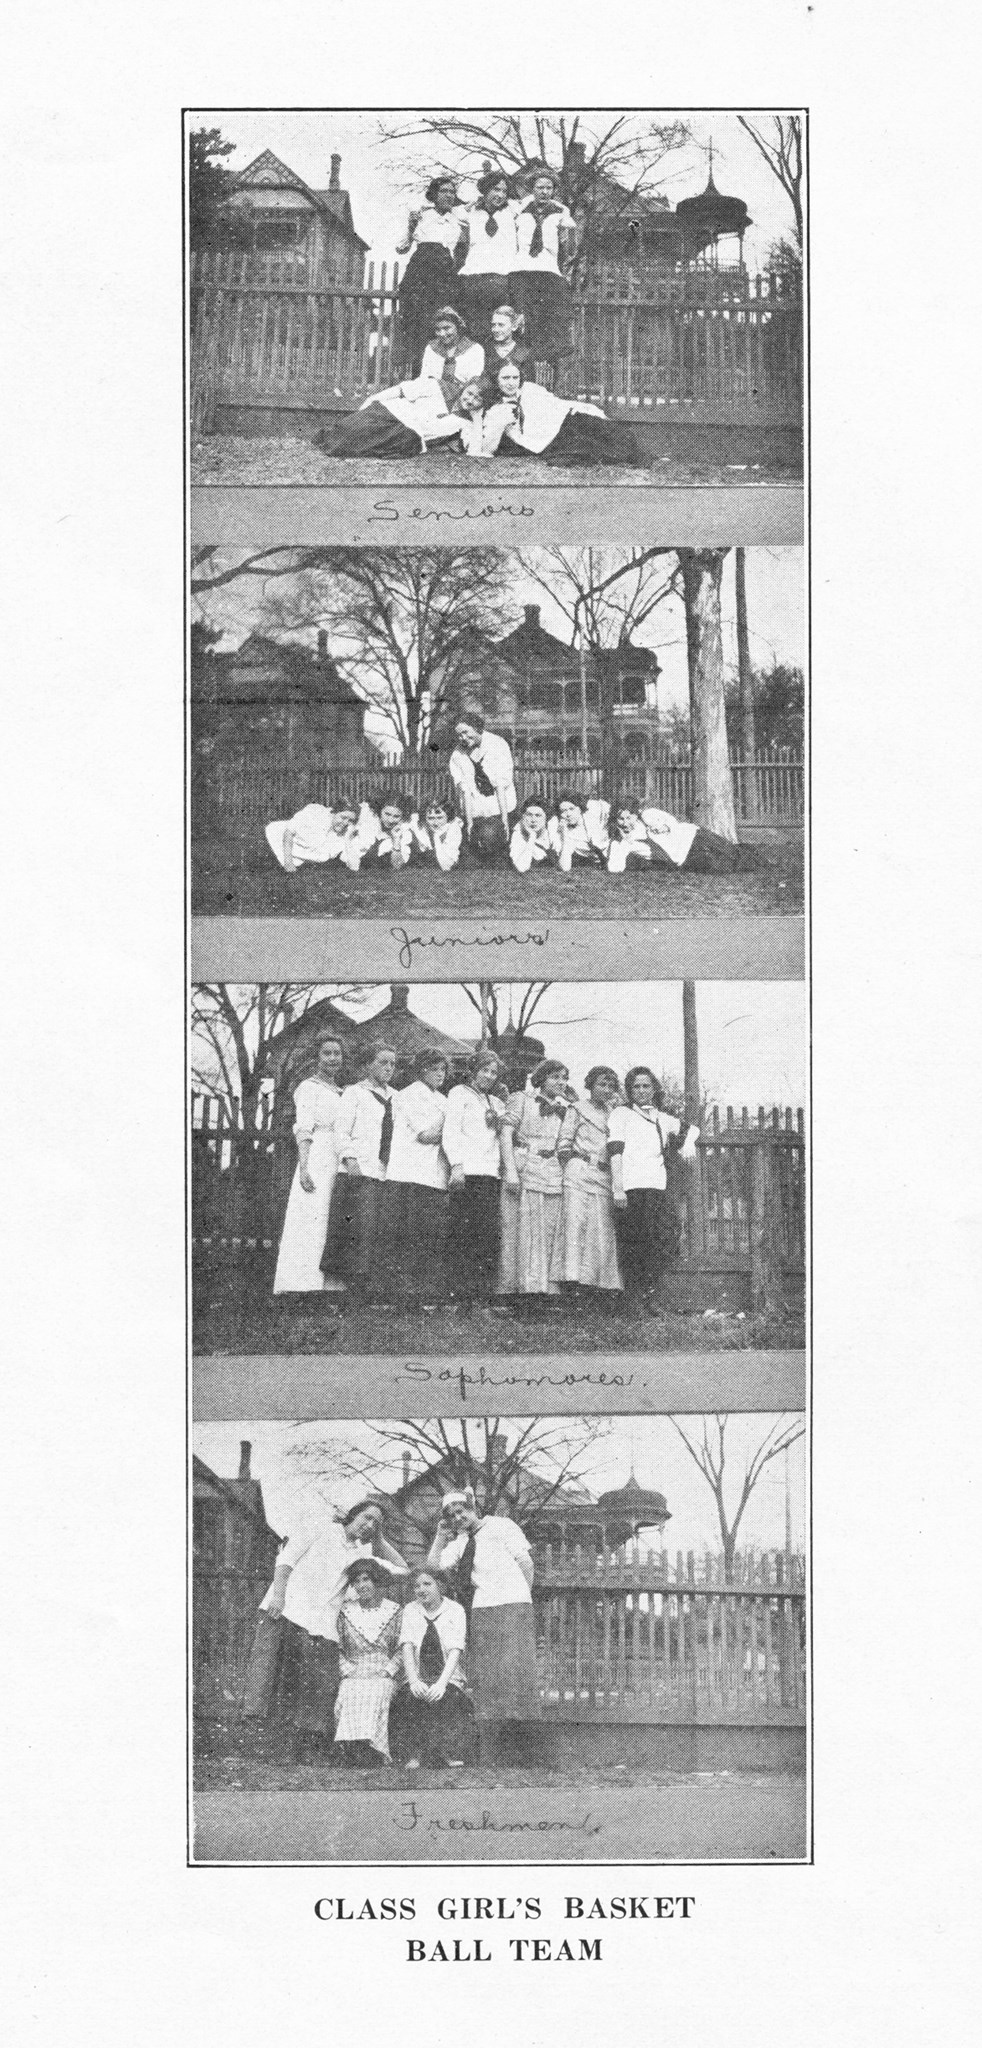 ../../../Images/Large/1912/Arclight-1912-pg0052.jpg